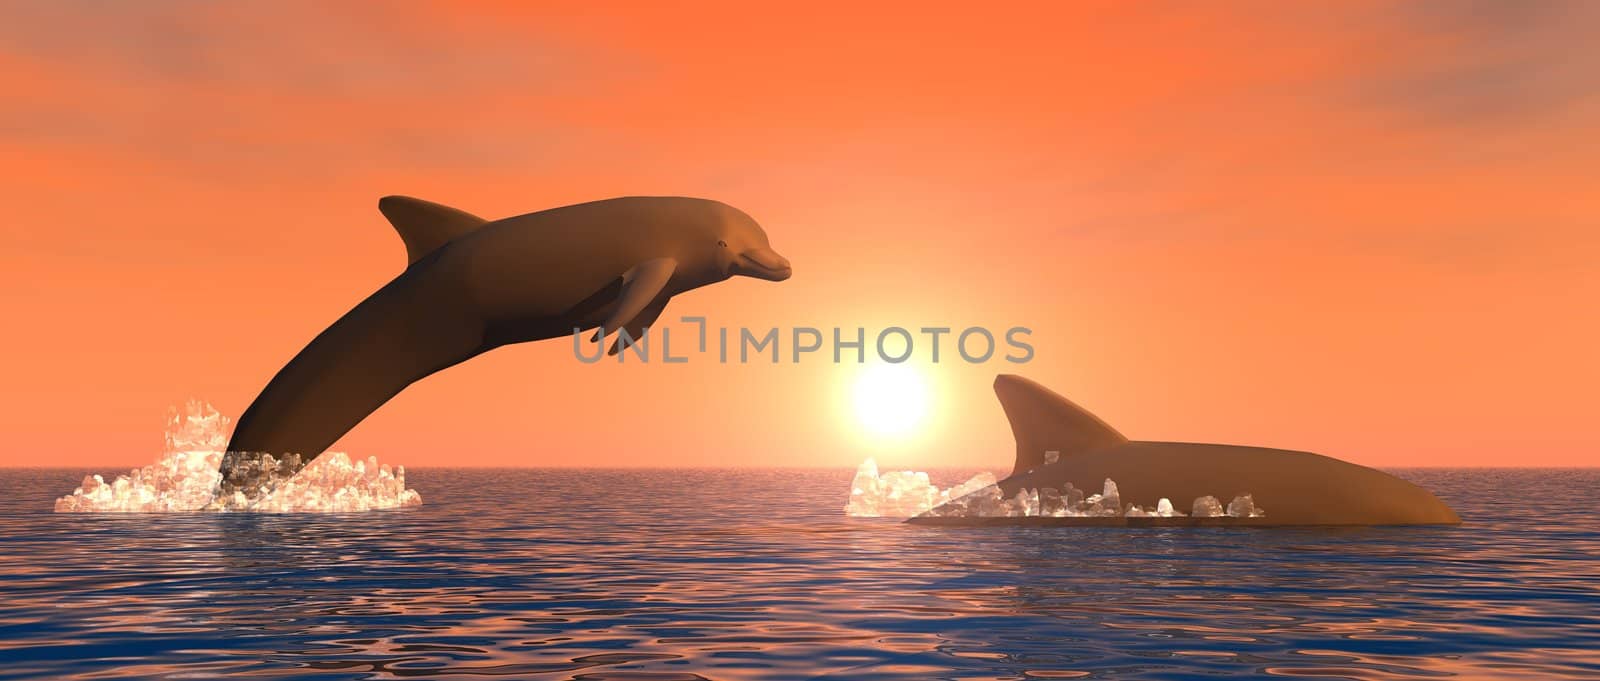 illustration showing some dolphins playing at sunset